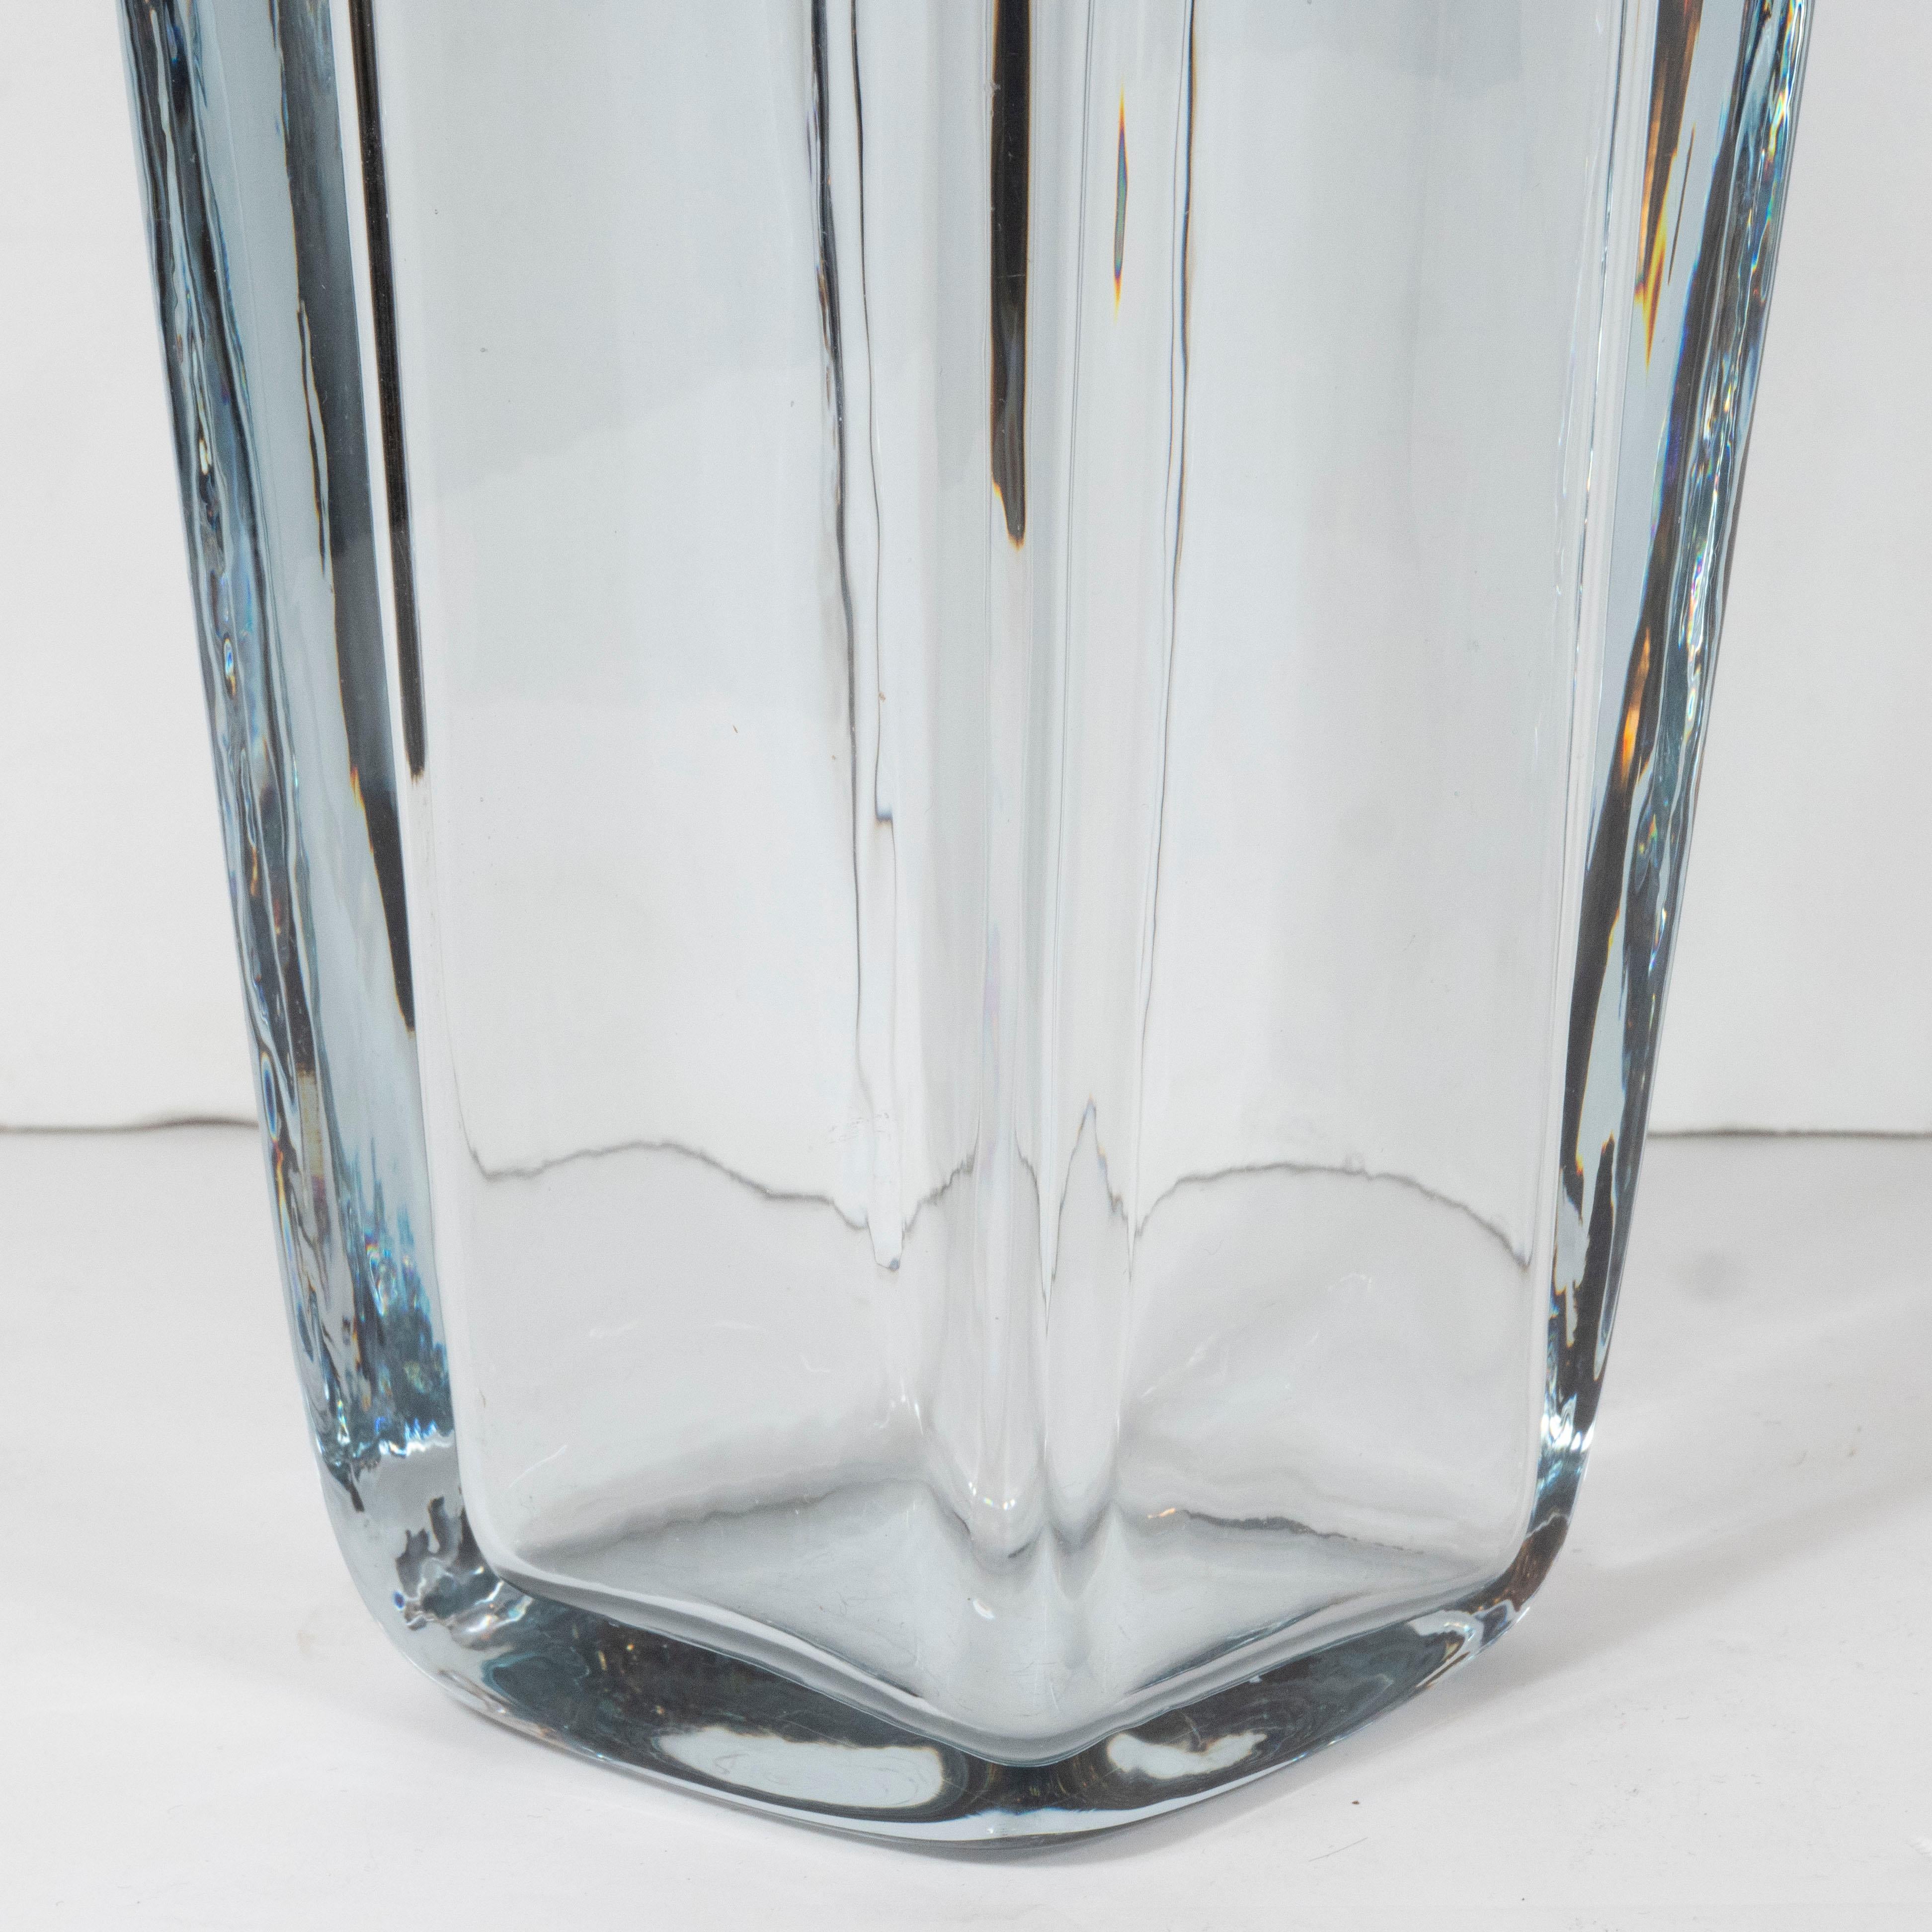 This elegant Mid-Century Modern vase was realized in Sweden circa 1960. It features a volumetric rectangular body with curved shoulders in thick translucent pale blue hand blown glass. With its clean lines and beautiful glass quality, this piece